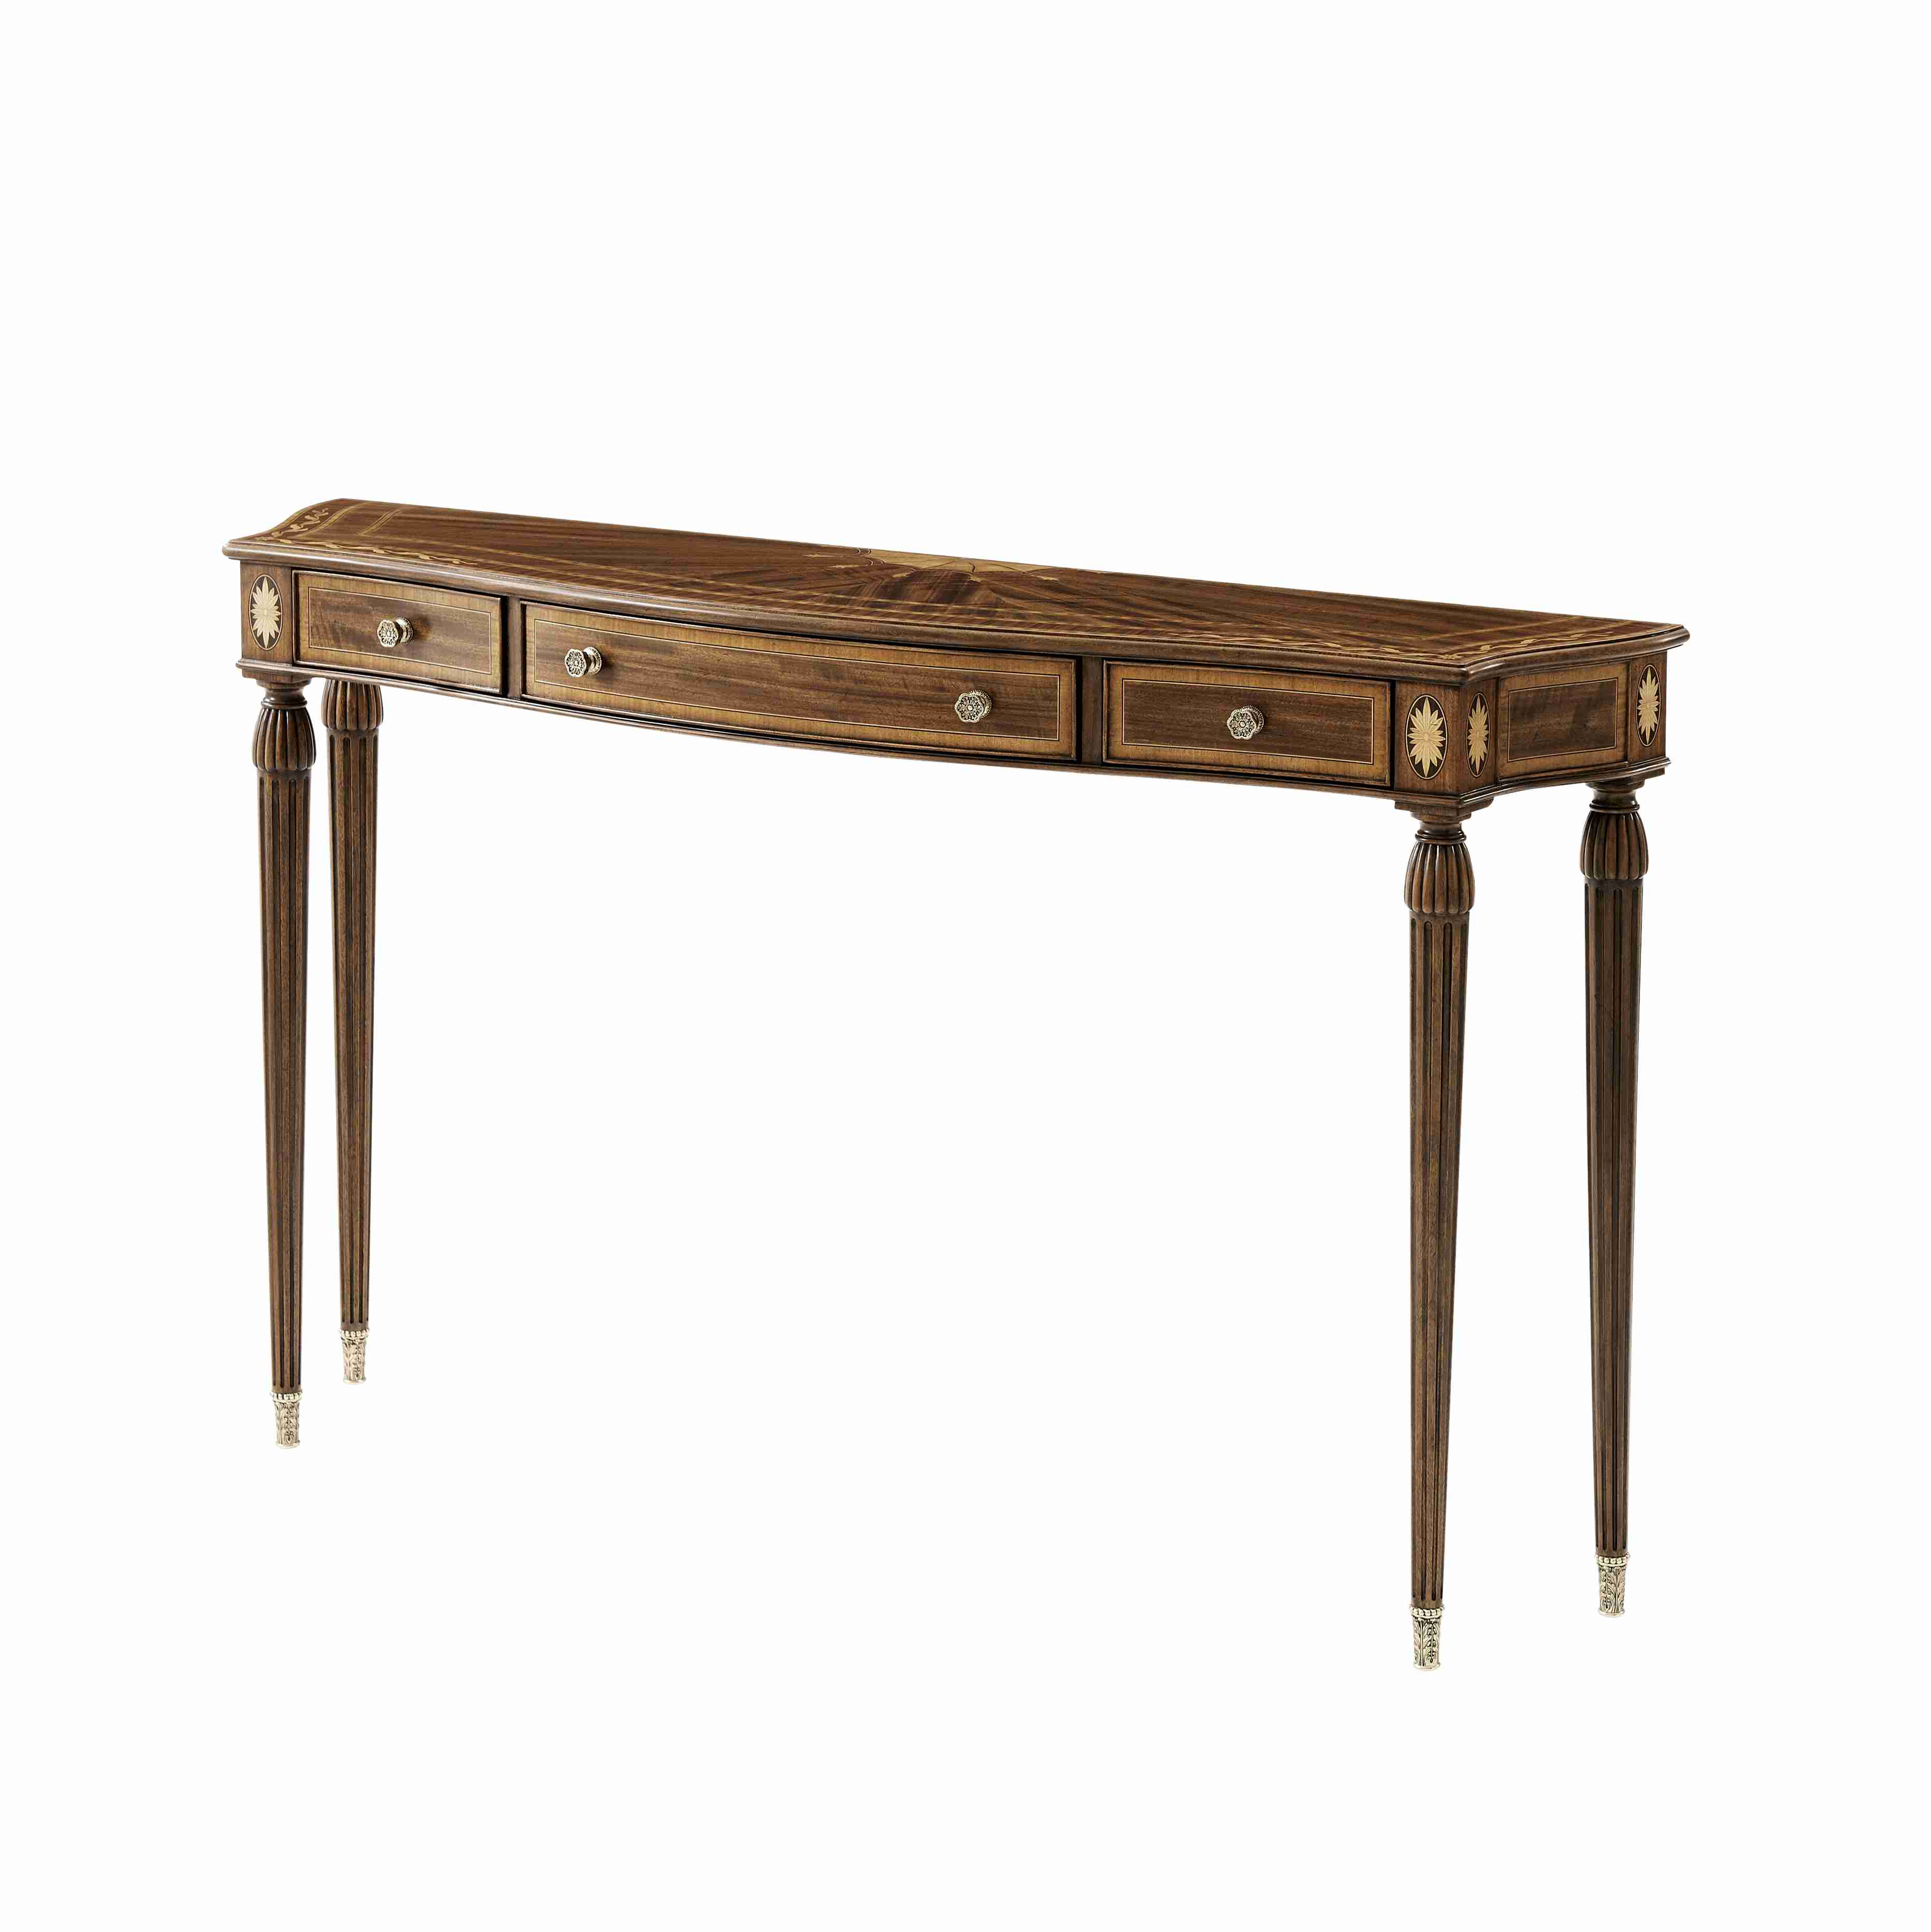 SHIRLEY CONSOLE TABLE